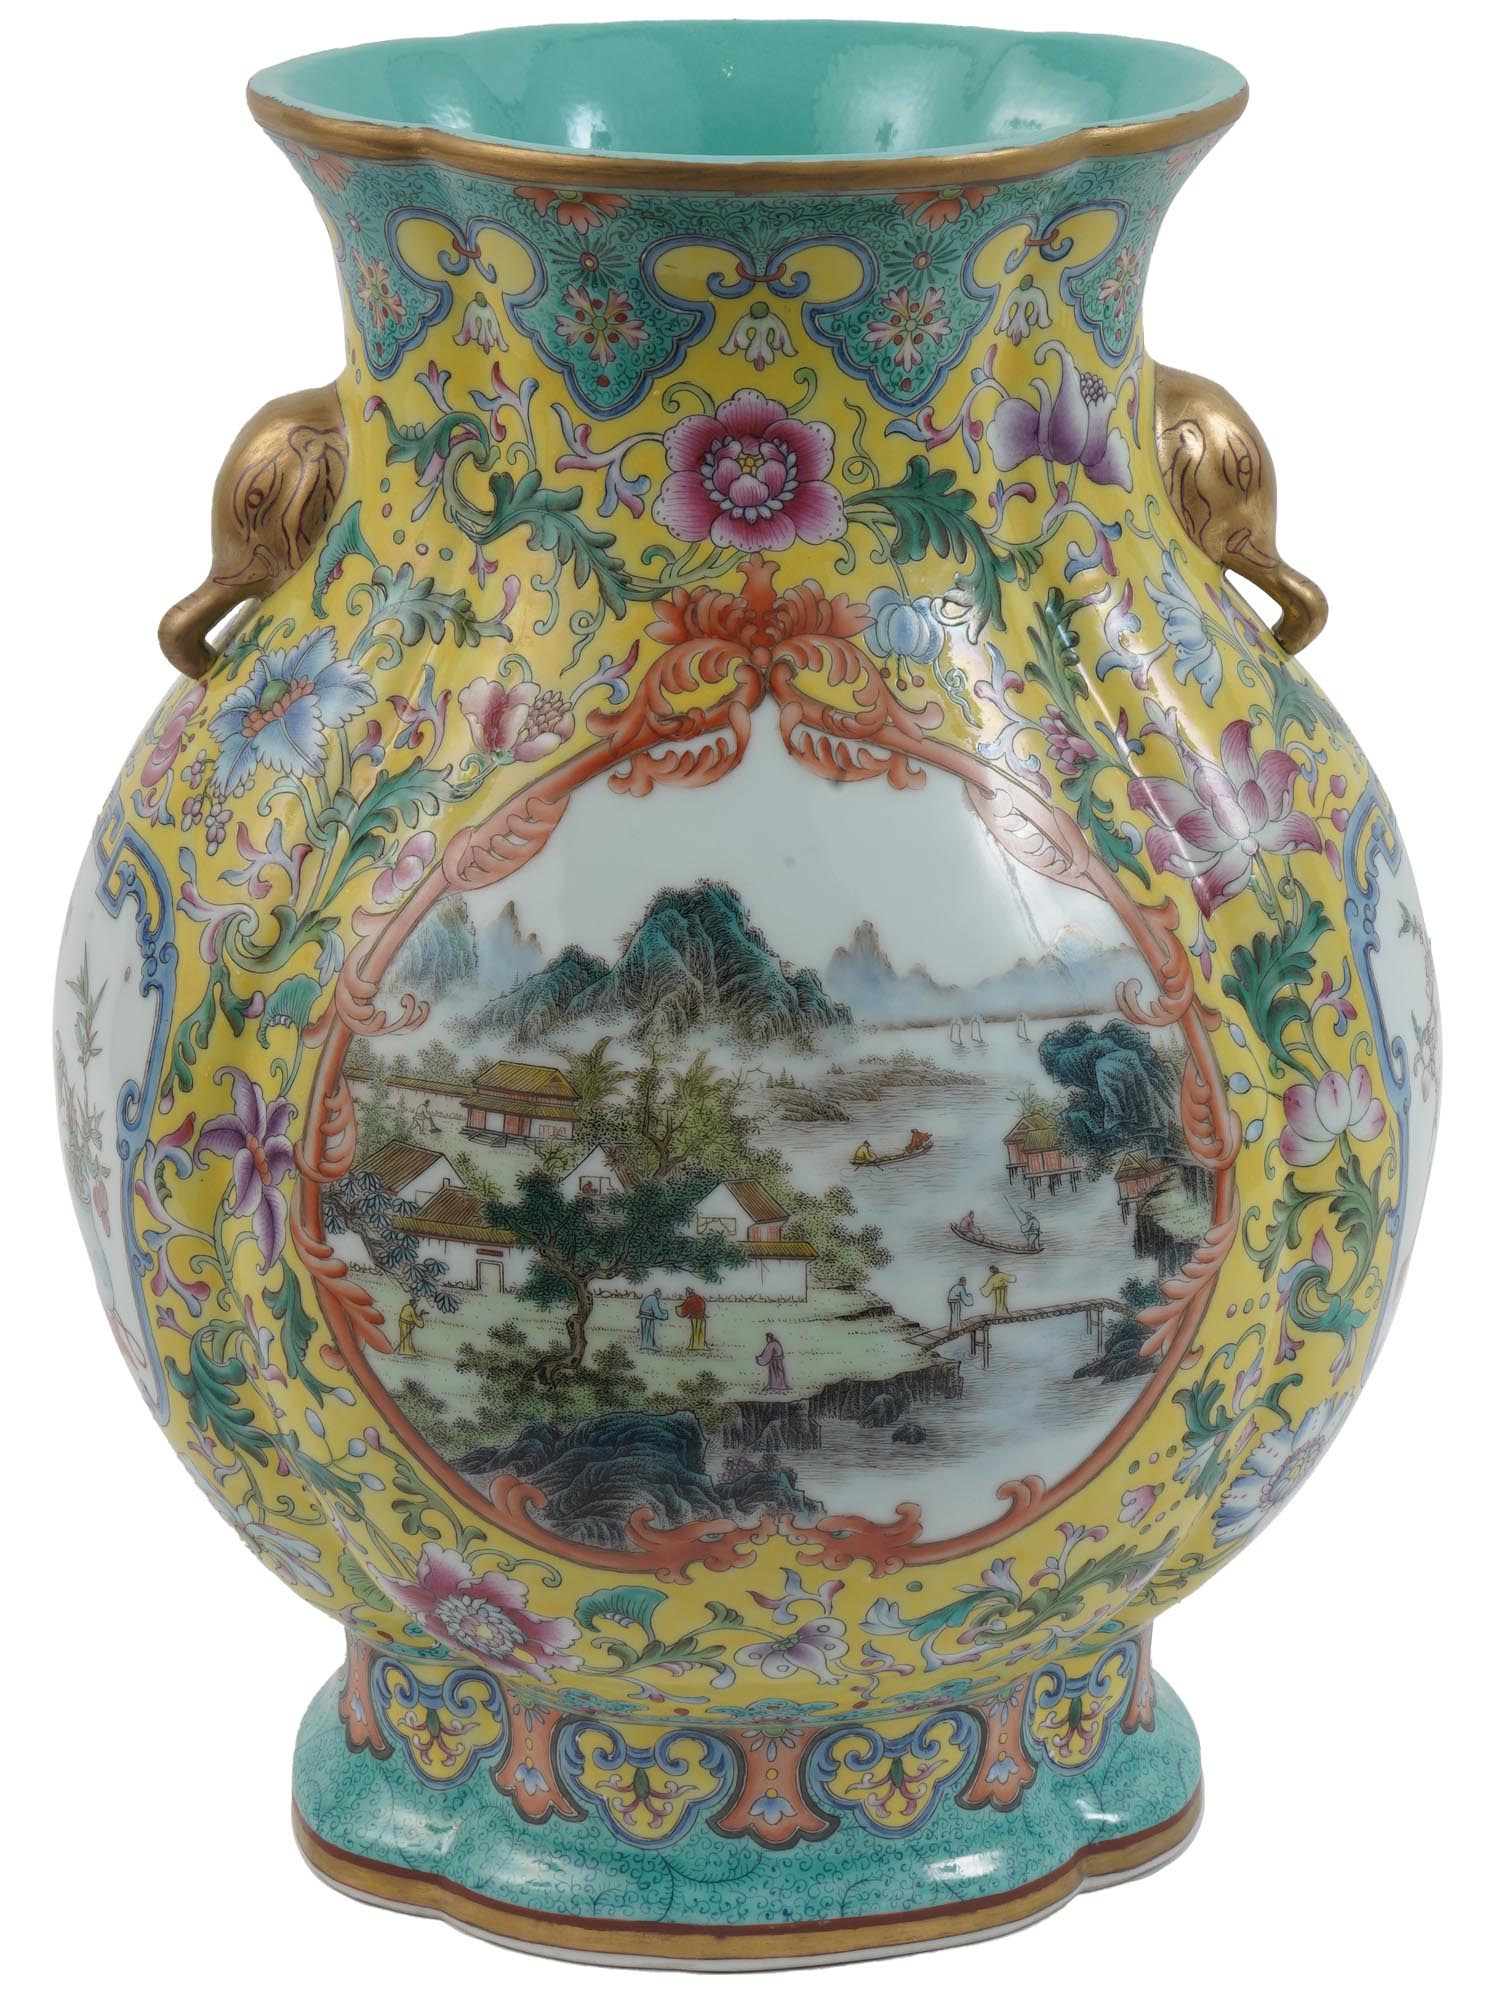 ANTIQUE CHINESE PORCELAIN YELLOW GROUND HU VASE PIC-0